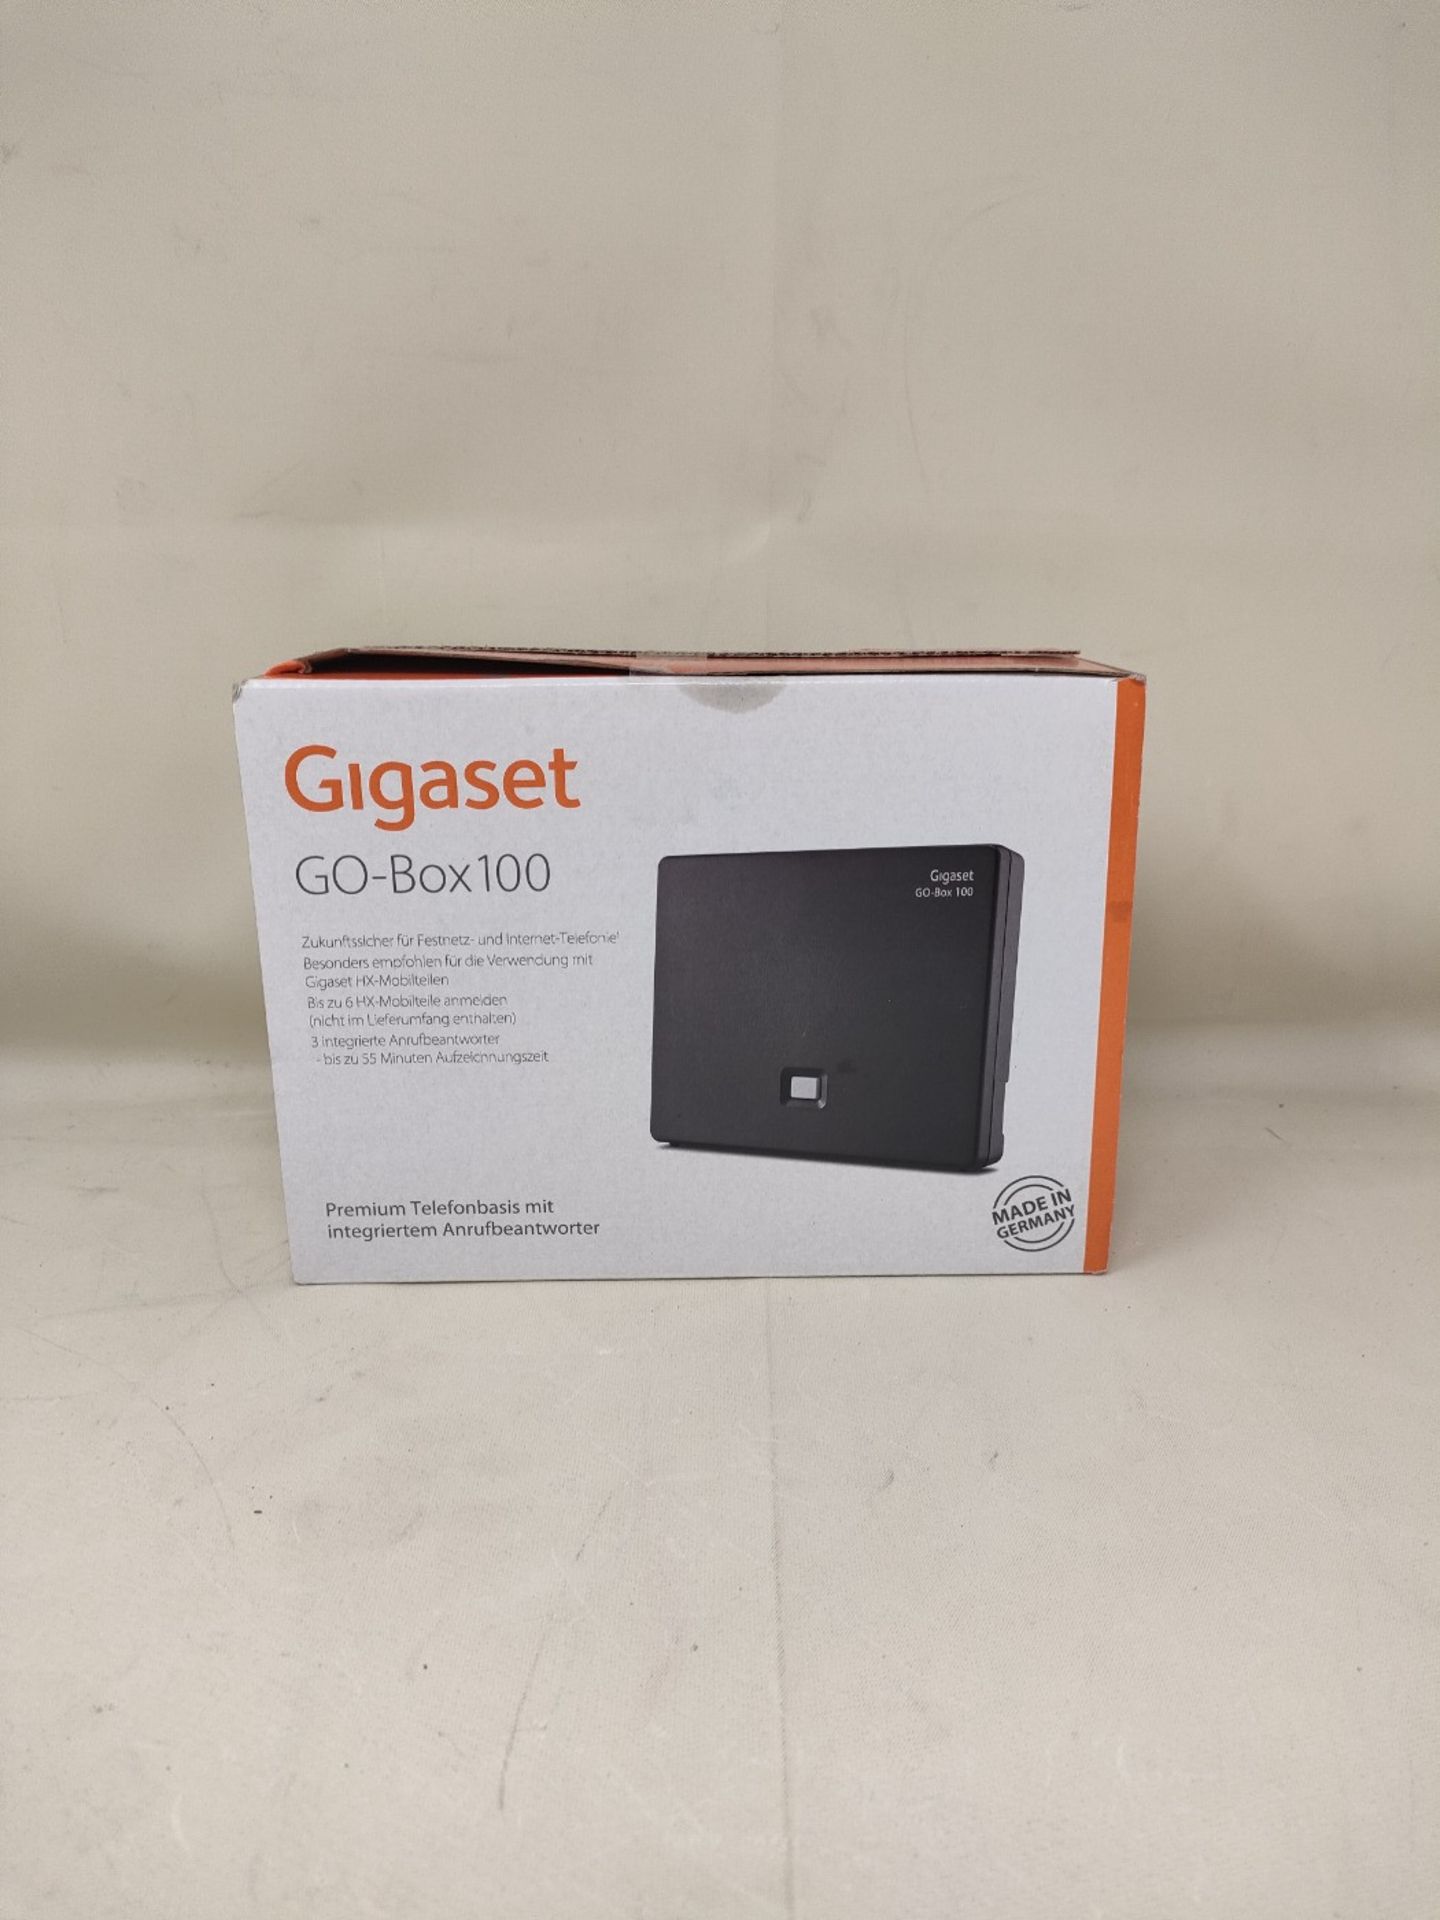 Gigaset DECT base station GO Box 100 - analogue connection via TAE connection or via L - Image 2 of 3